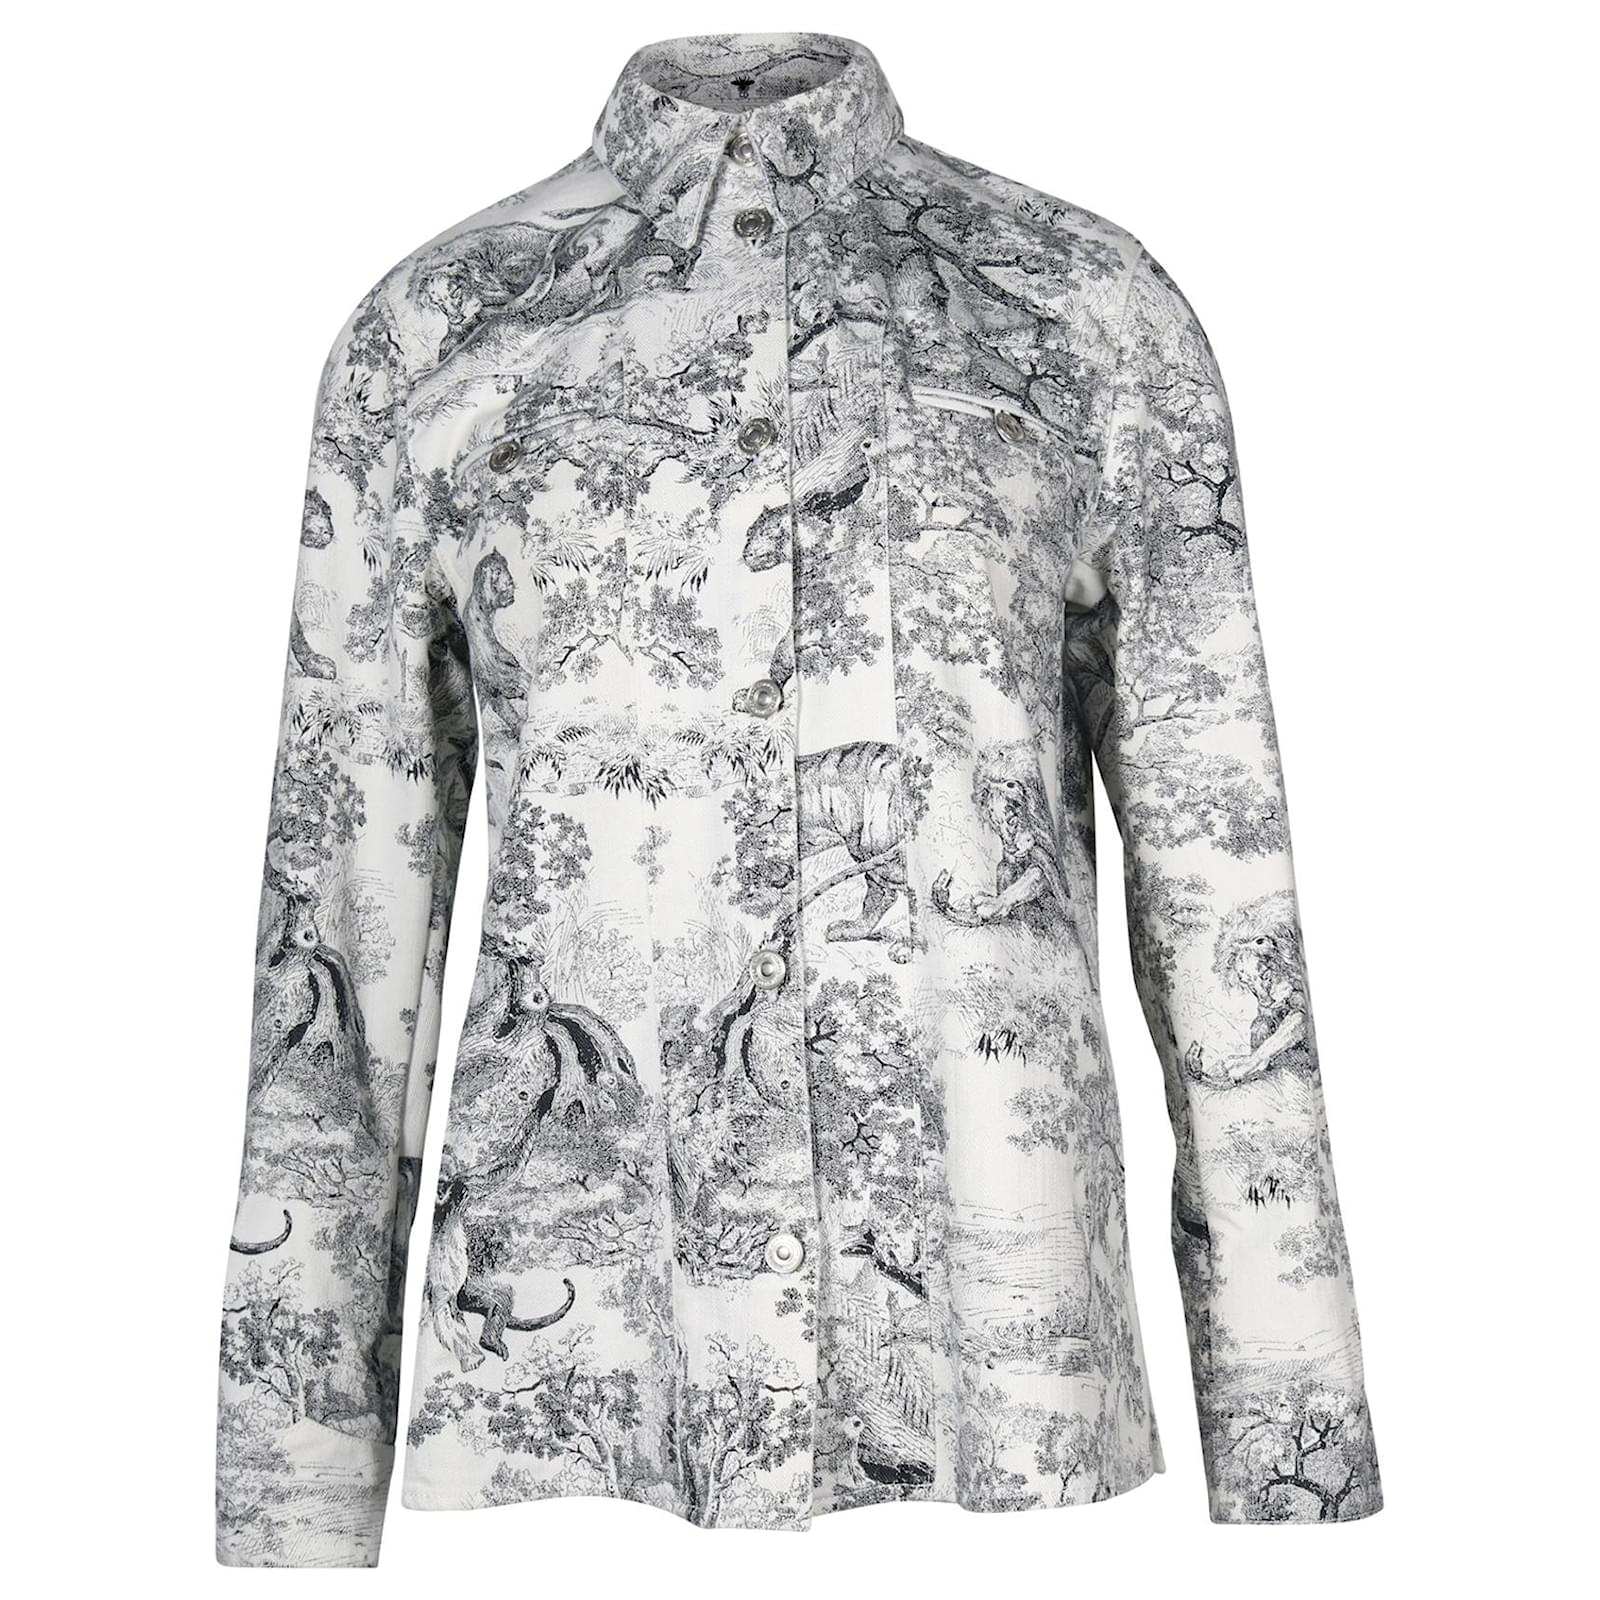 Christian Dior Toile De Jouy Button Front Long Sleeve Shirt in